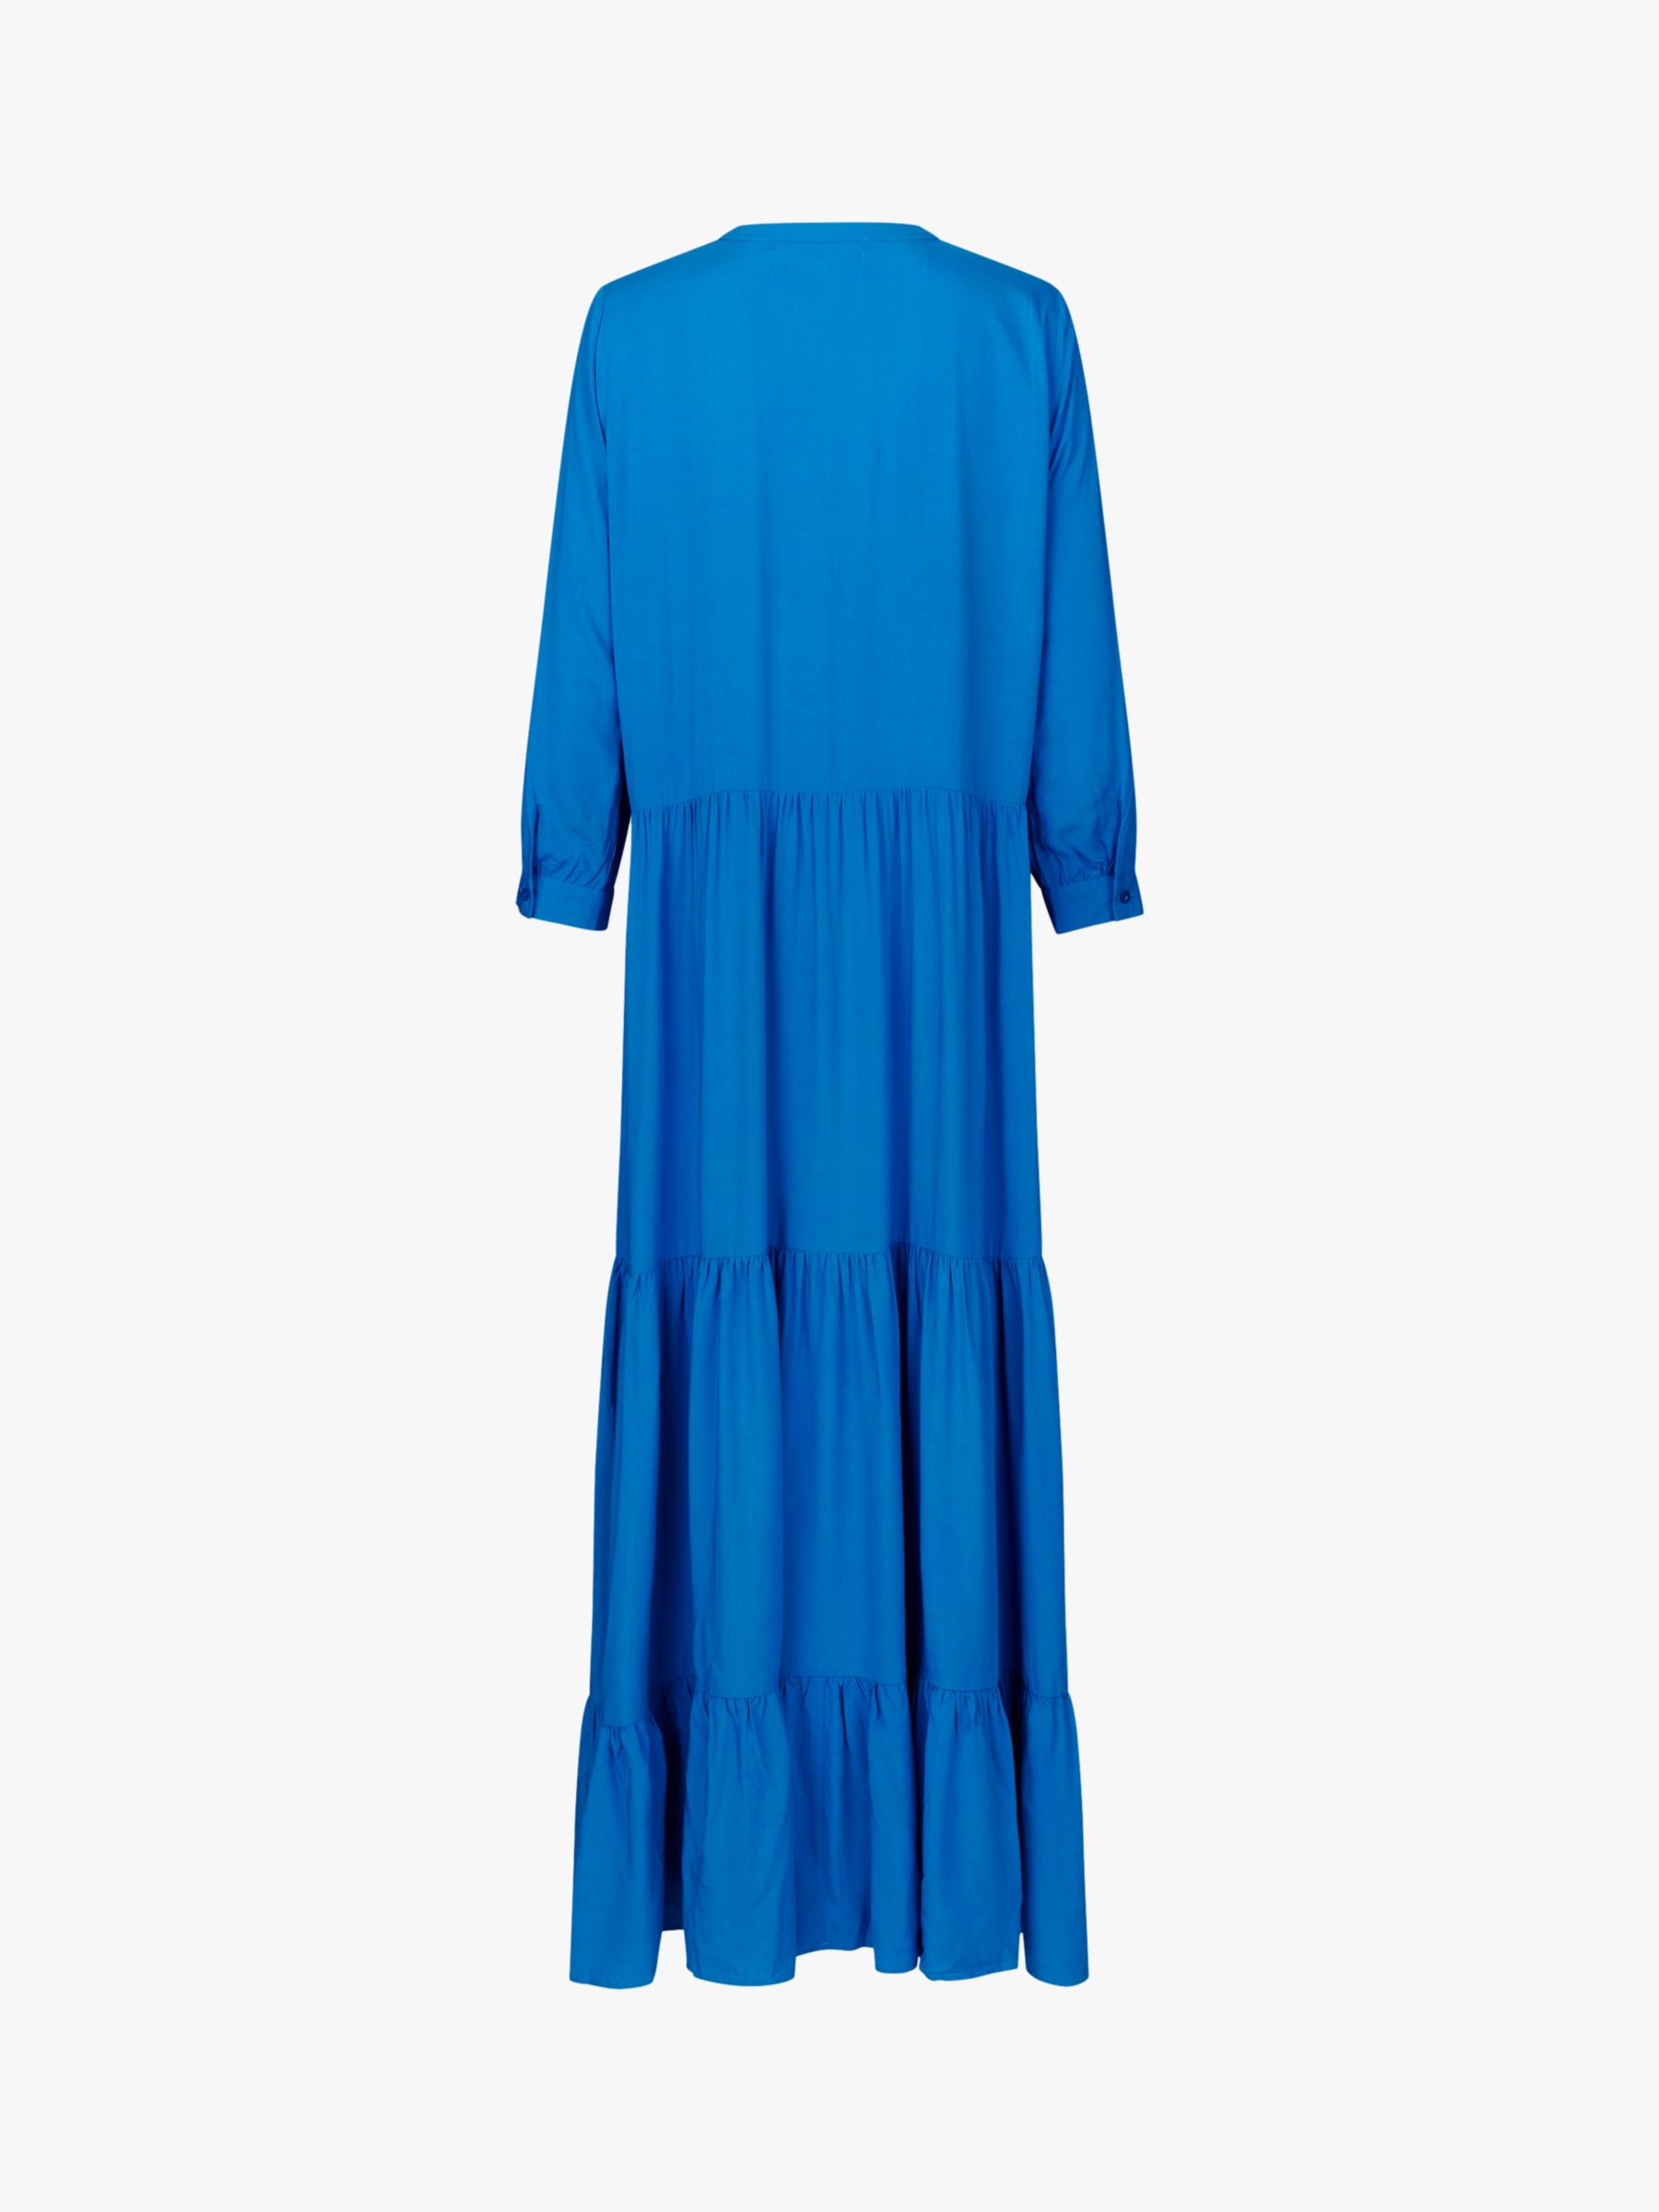 Lollys Laundry Nee Tiered Maxi Dress, Cobalt, S